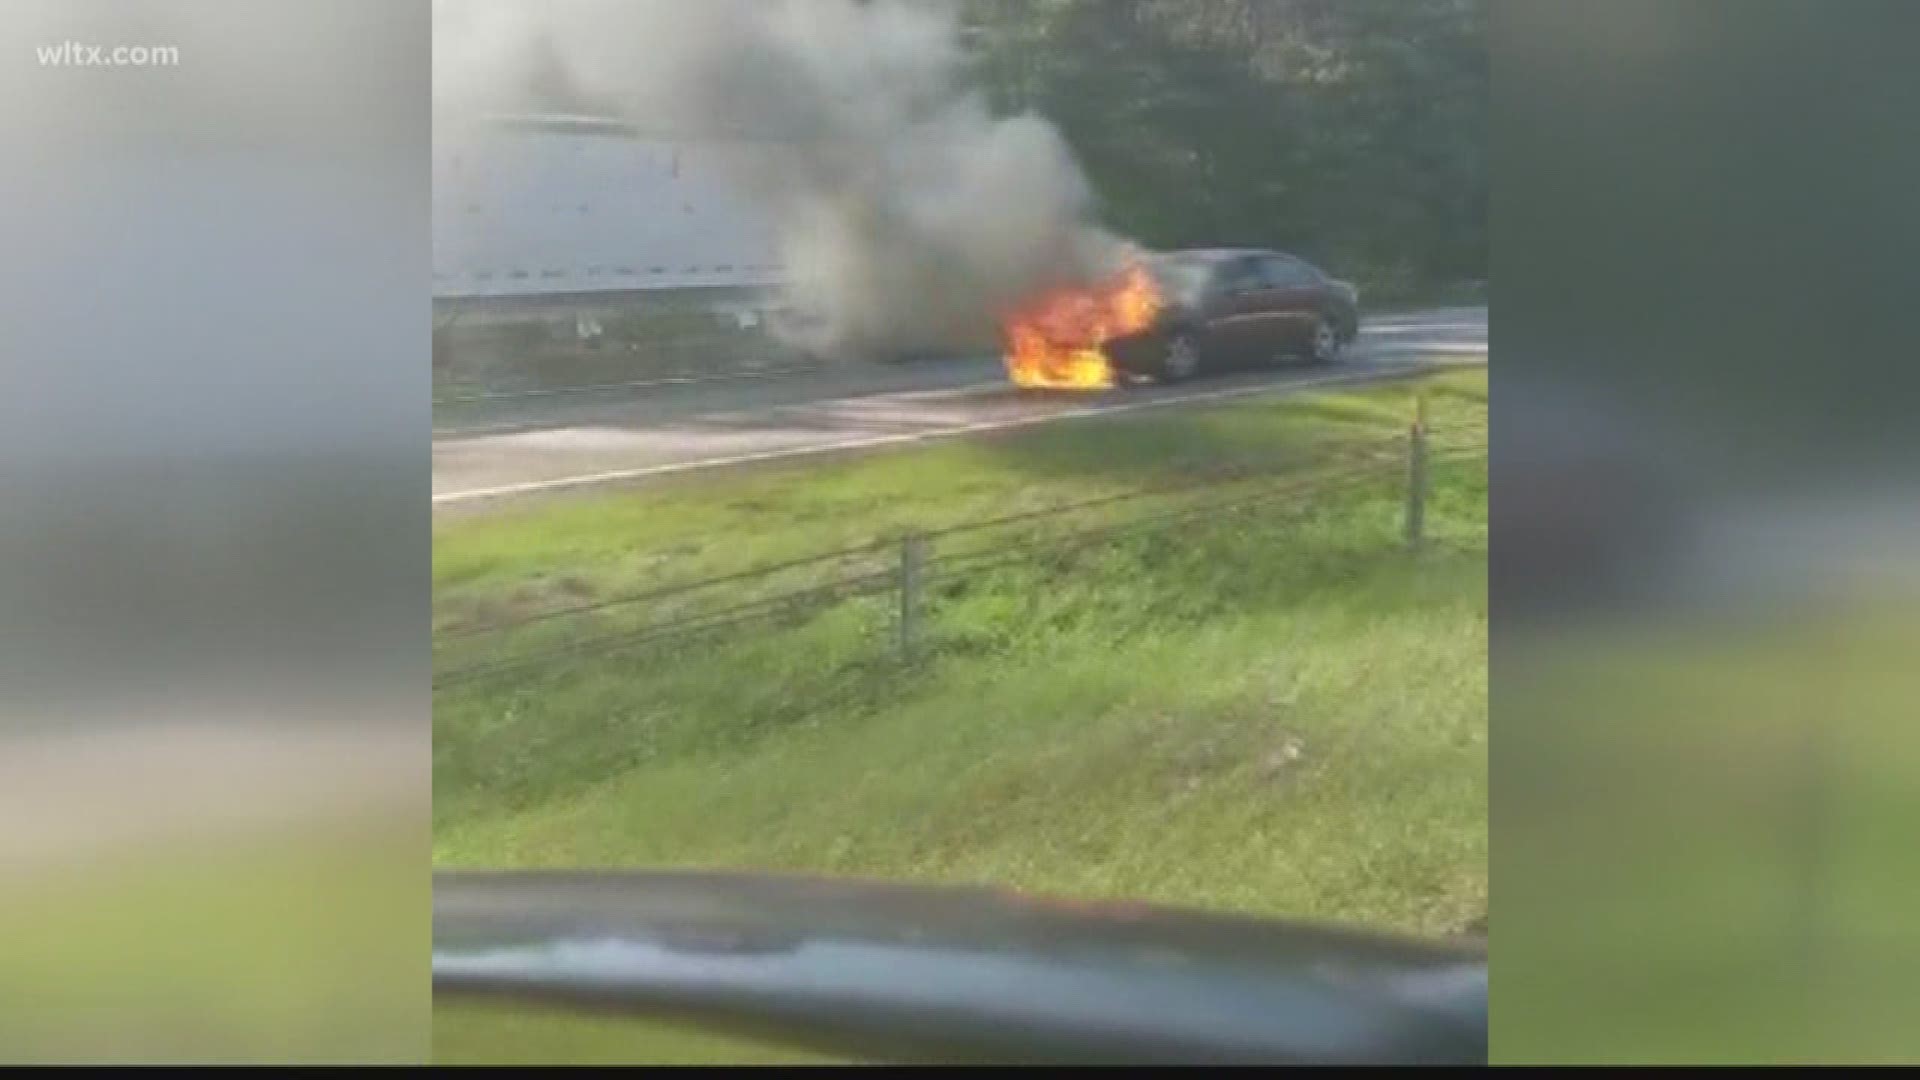 According to SCDOT, a vehicle fire has all lanes blocked near mile marker 125